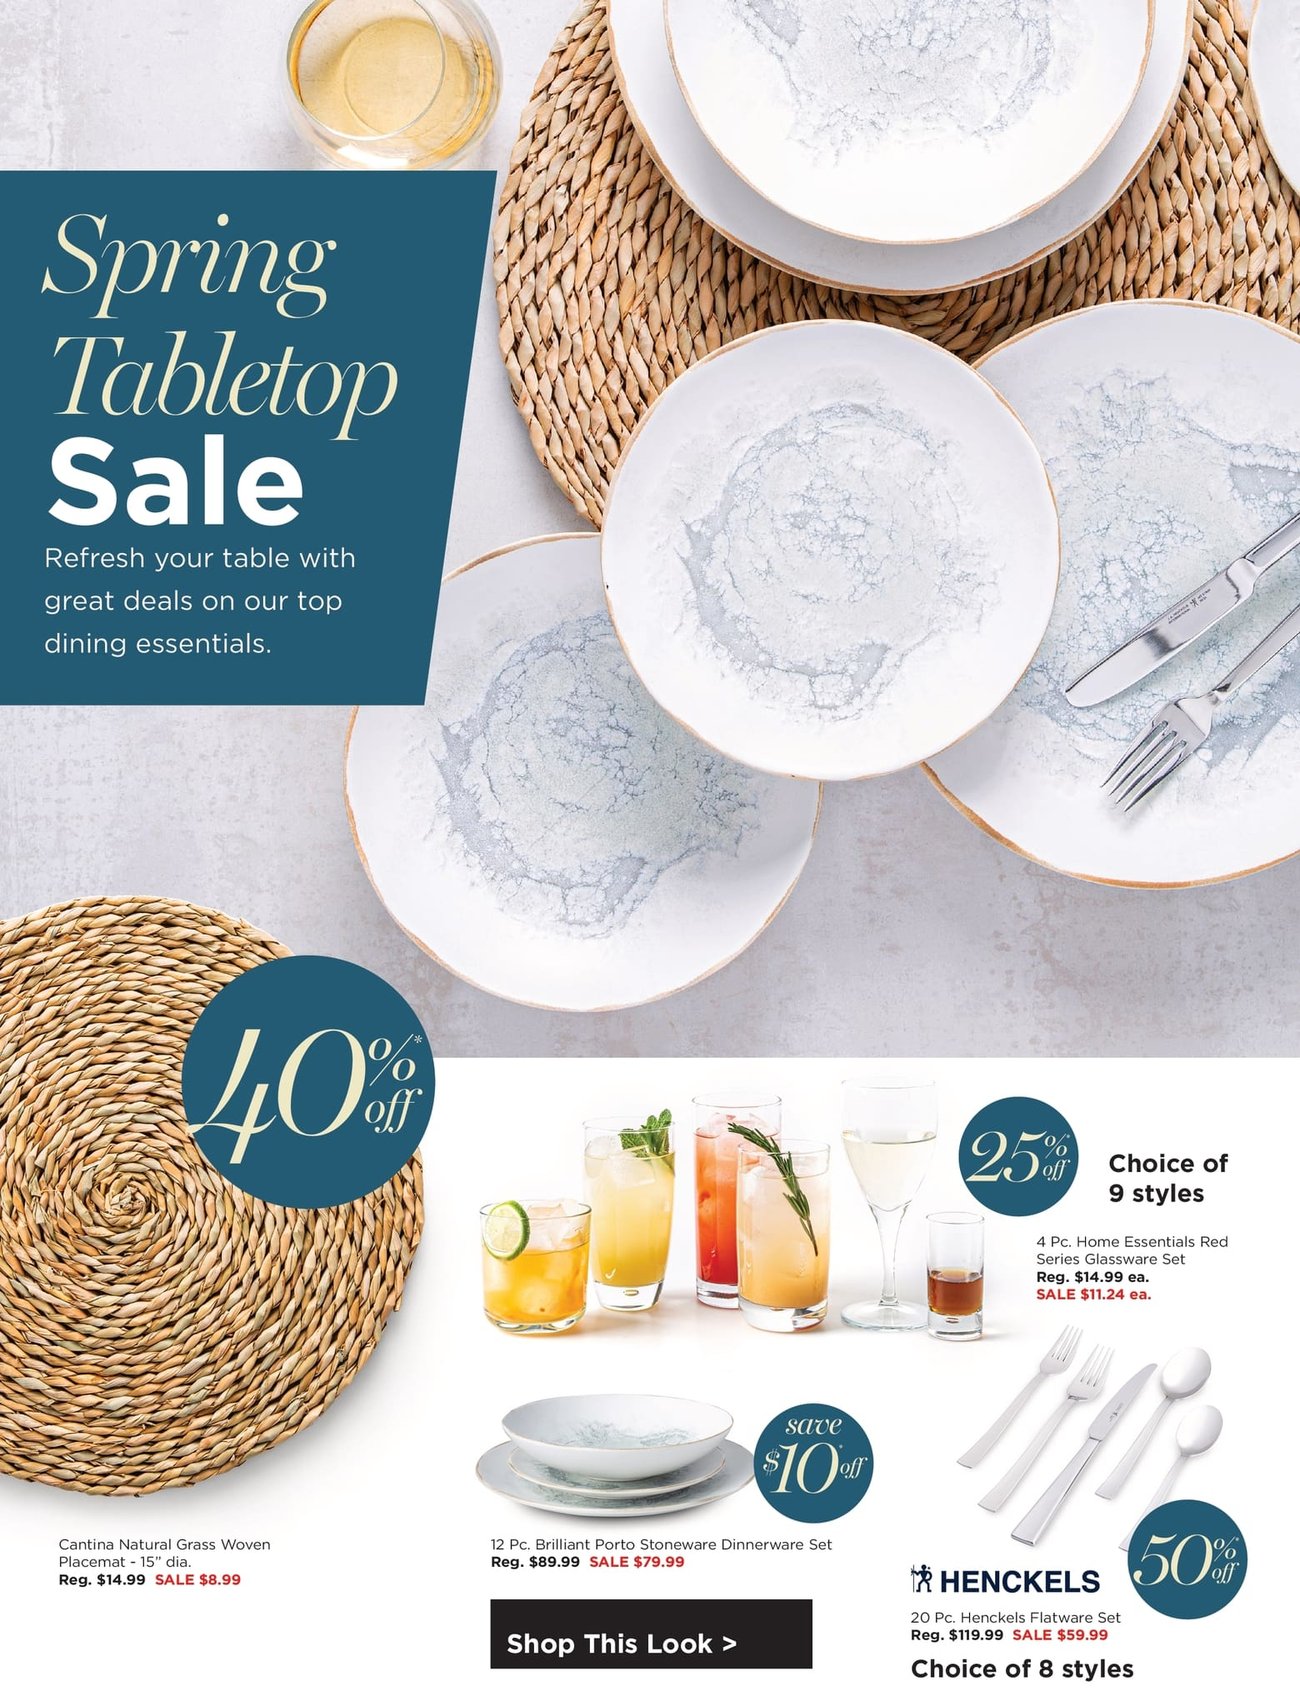 Kitchen Stuff Plus - Everything Cooking Sale - Page 17